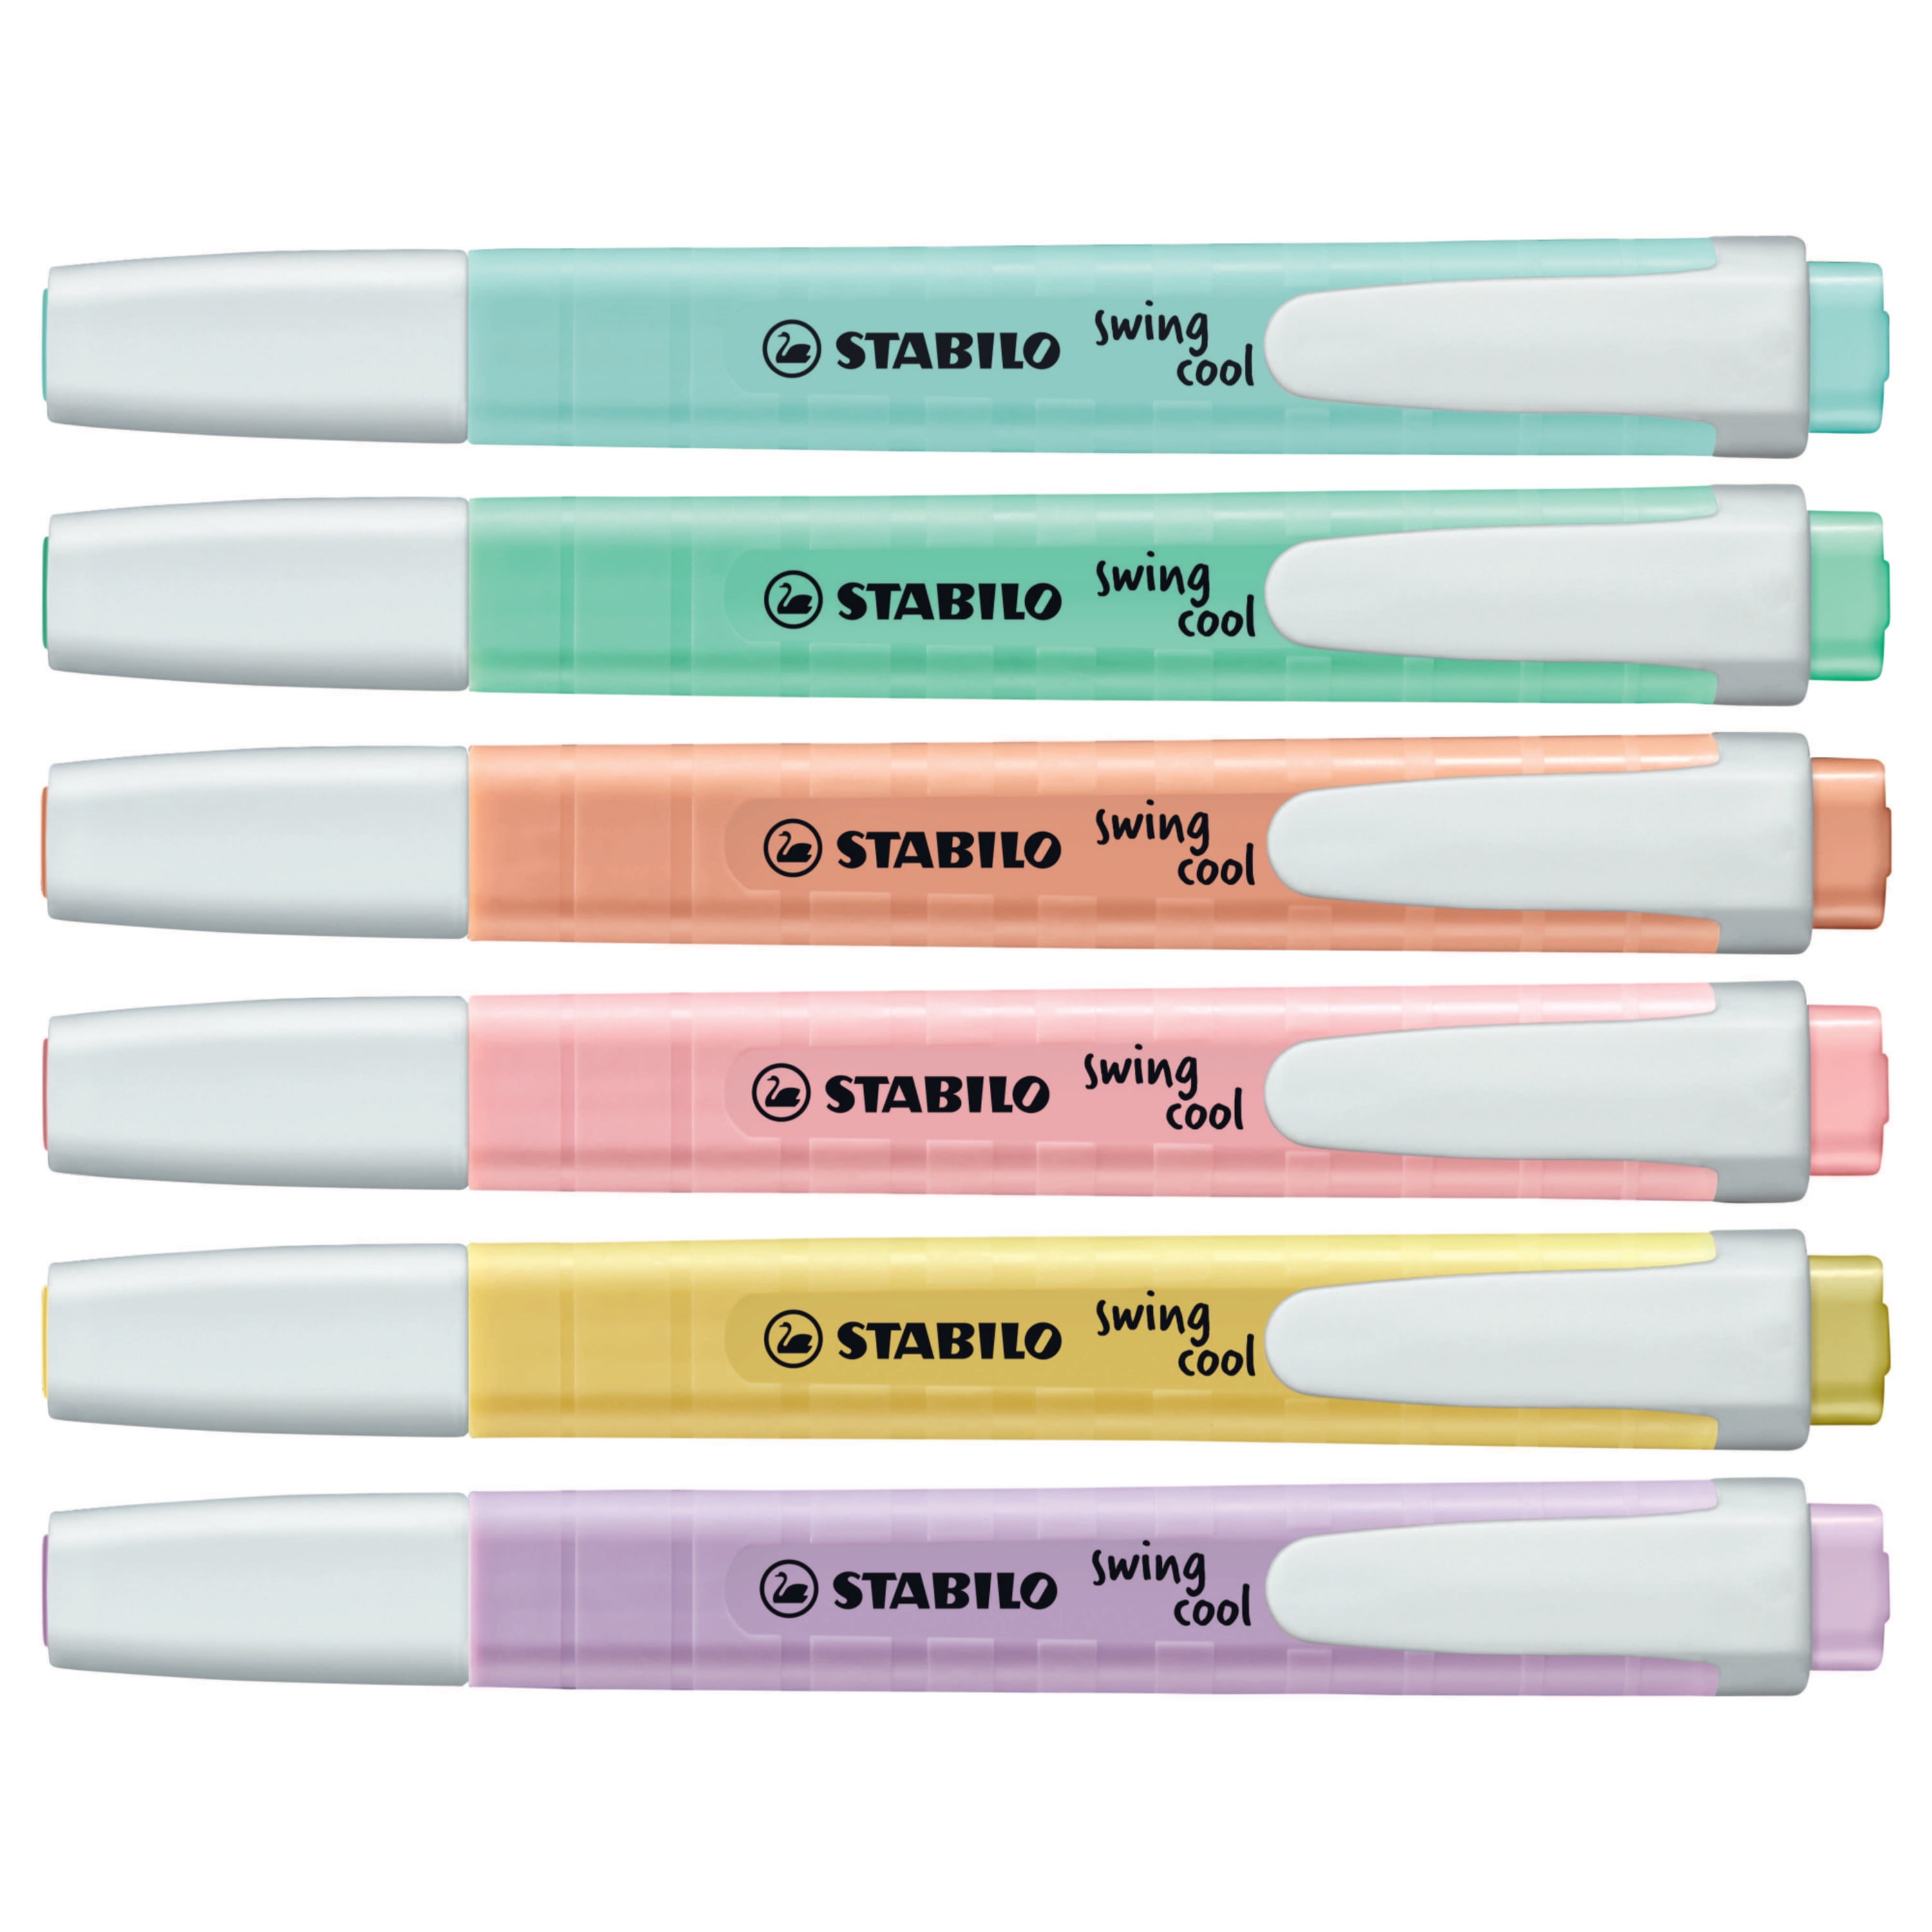 Highlighter - STABILO swing cool Pastel - Assorted Colours and